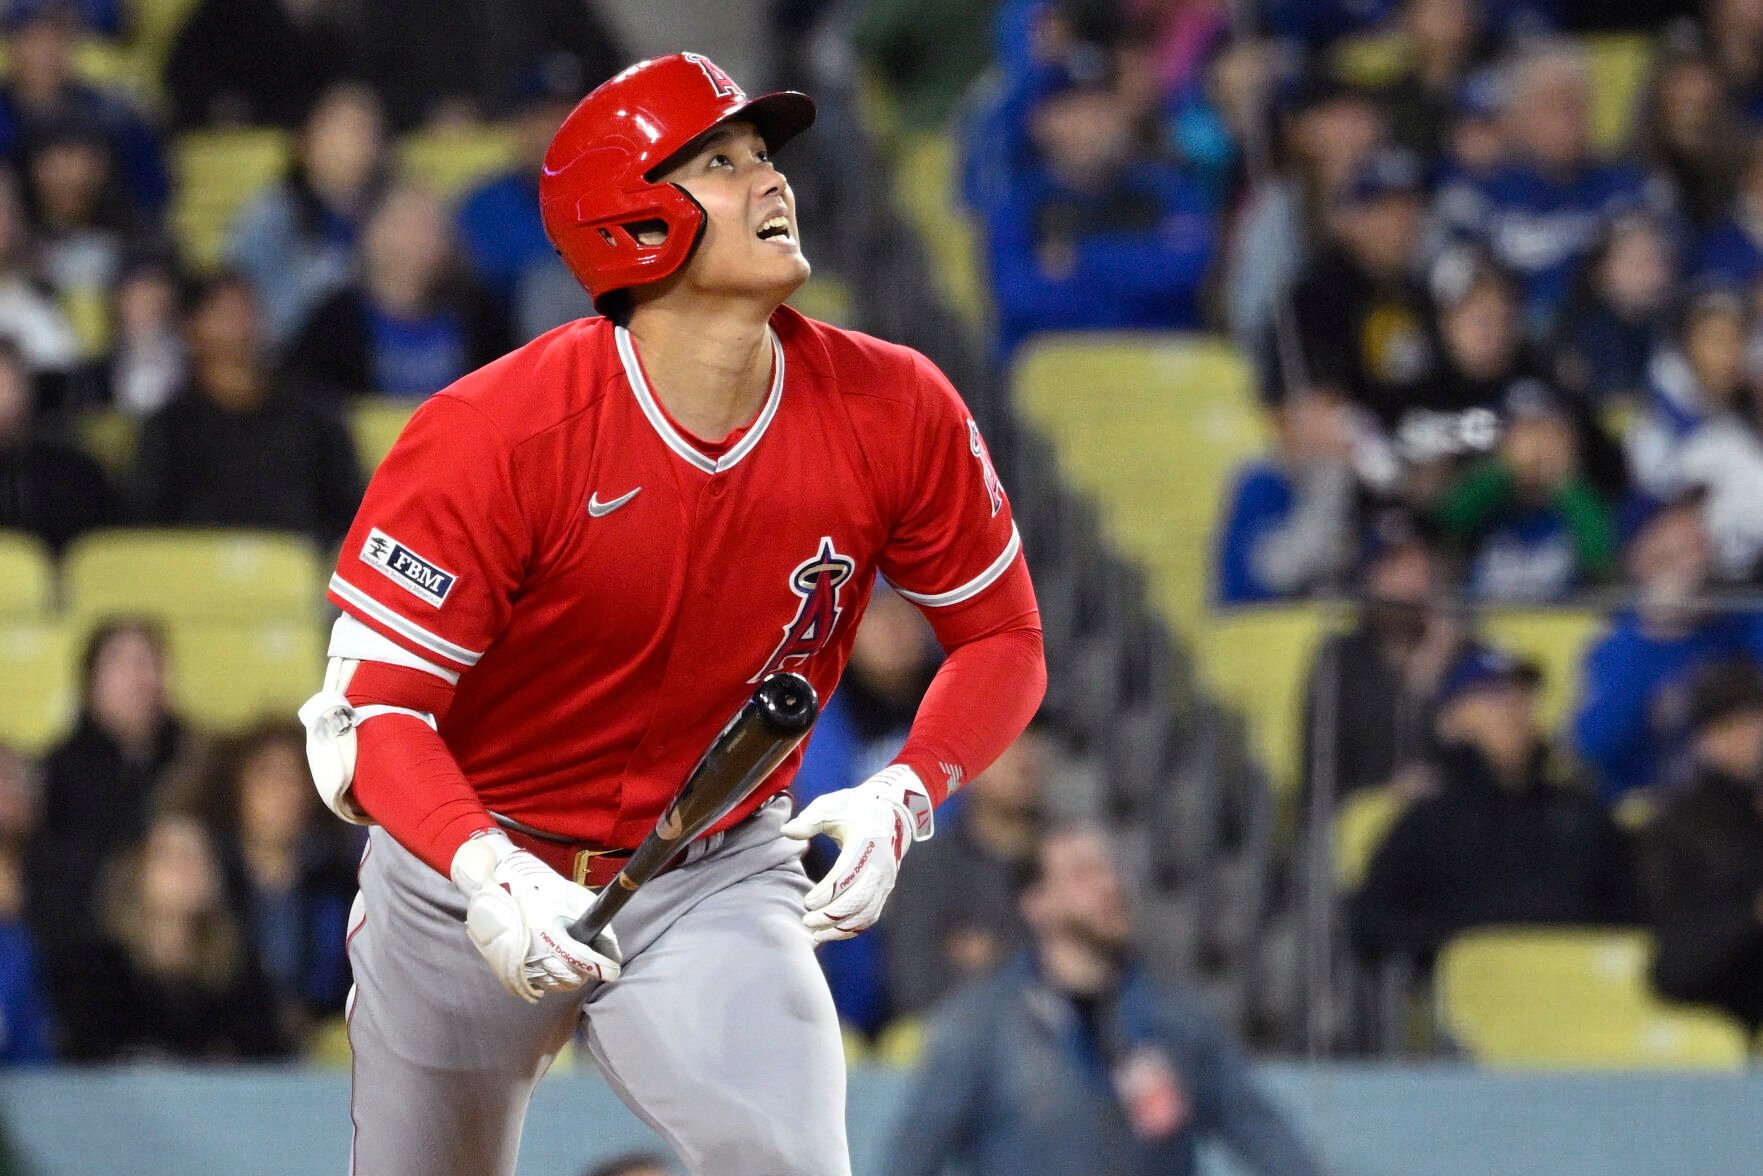 MLB News: MLB Opening Day 2022 Recap: Spoilsport Reds, Astros stop opening  day party for champion Braves and Shohei Ohtani